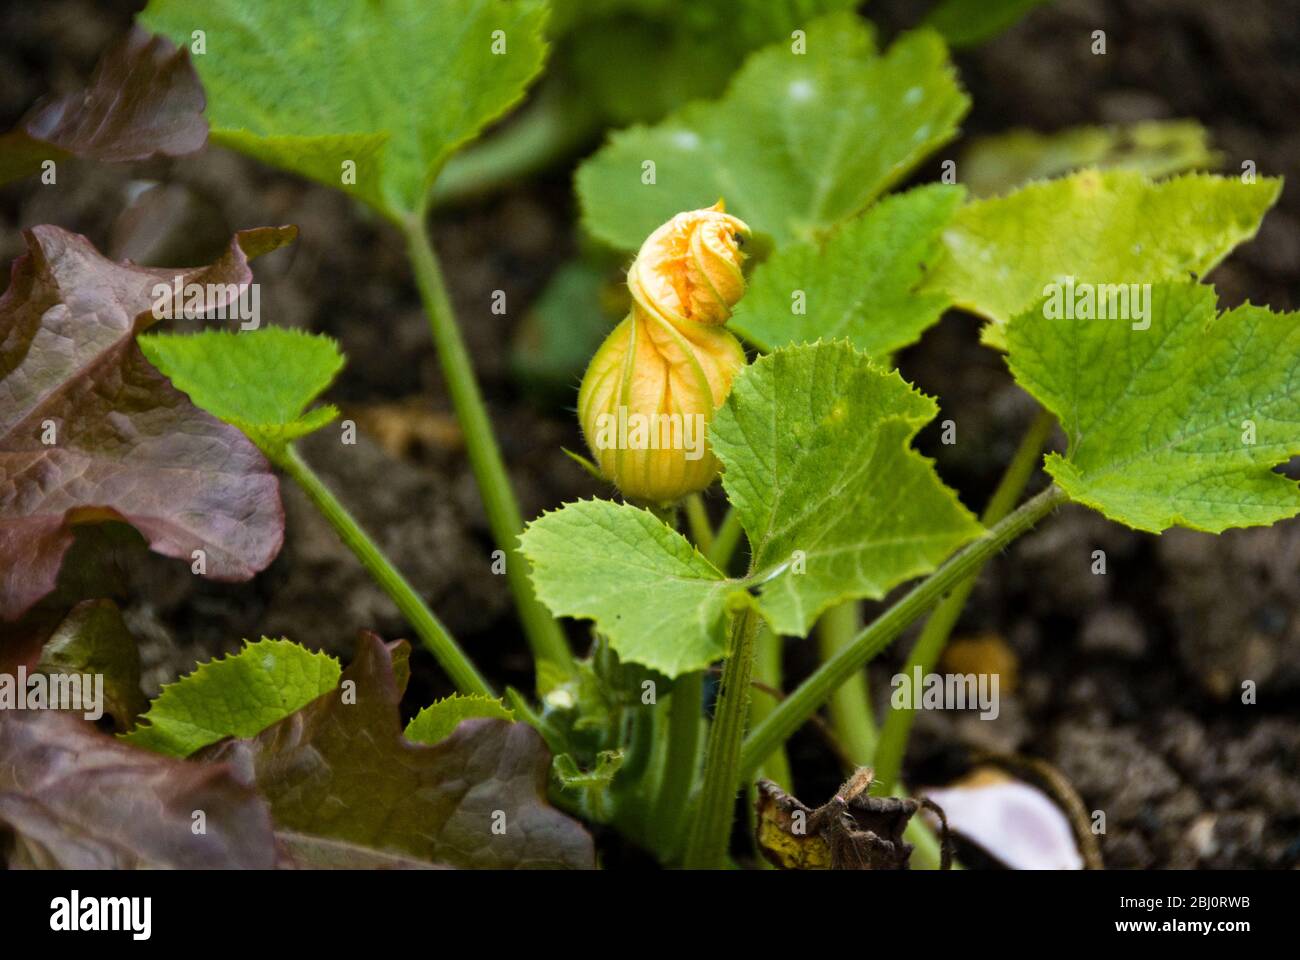 Courgette plants growing in good black earth showing opening furled flowers. - Stock Photo